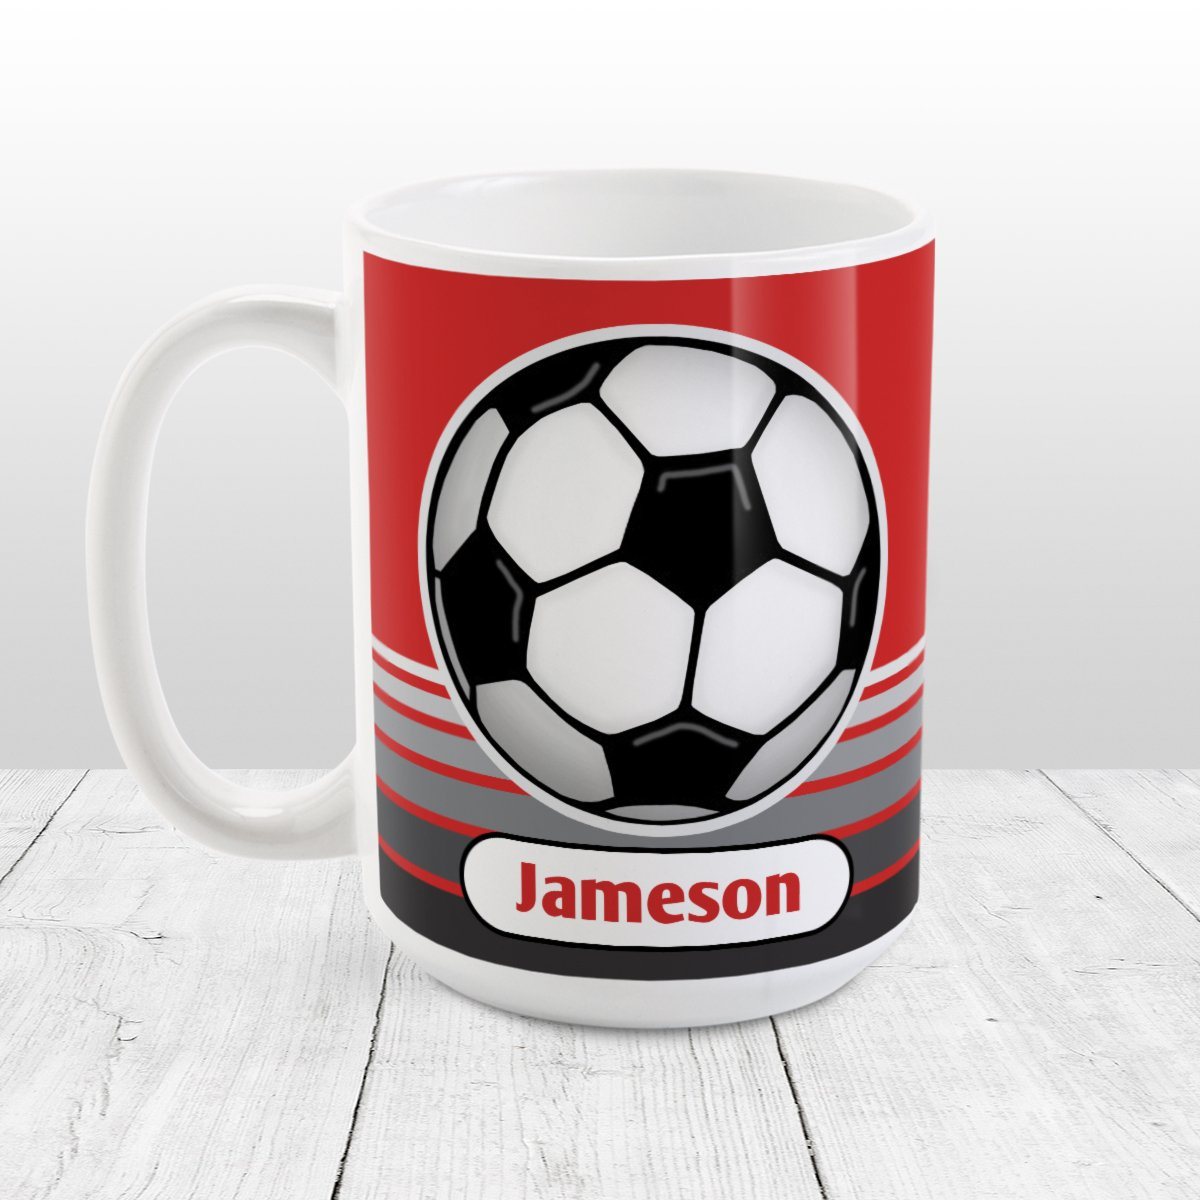 Personalized Gray Gradient Lined Red Soccer Ball Mug at Amy's Coffee Mugs